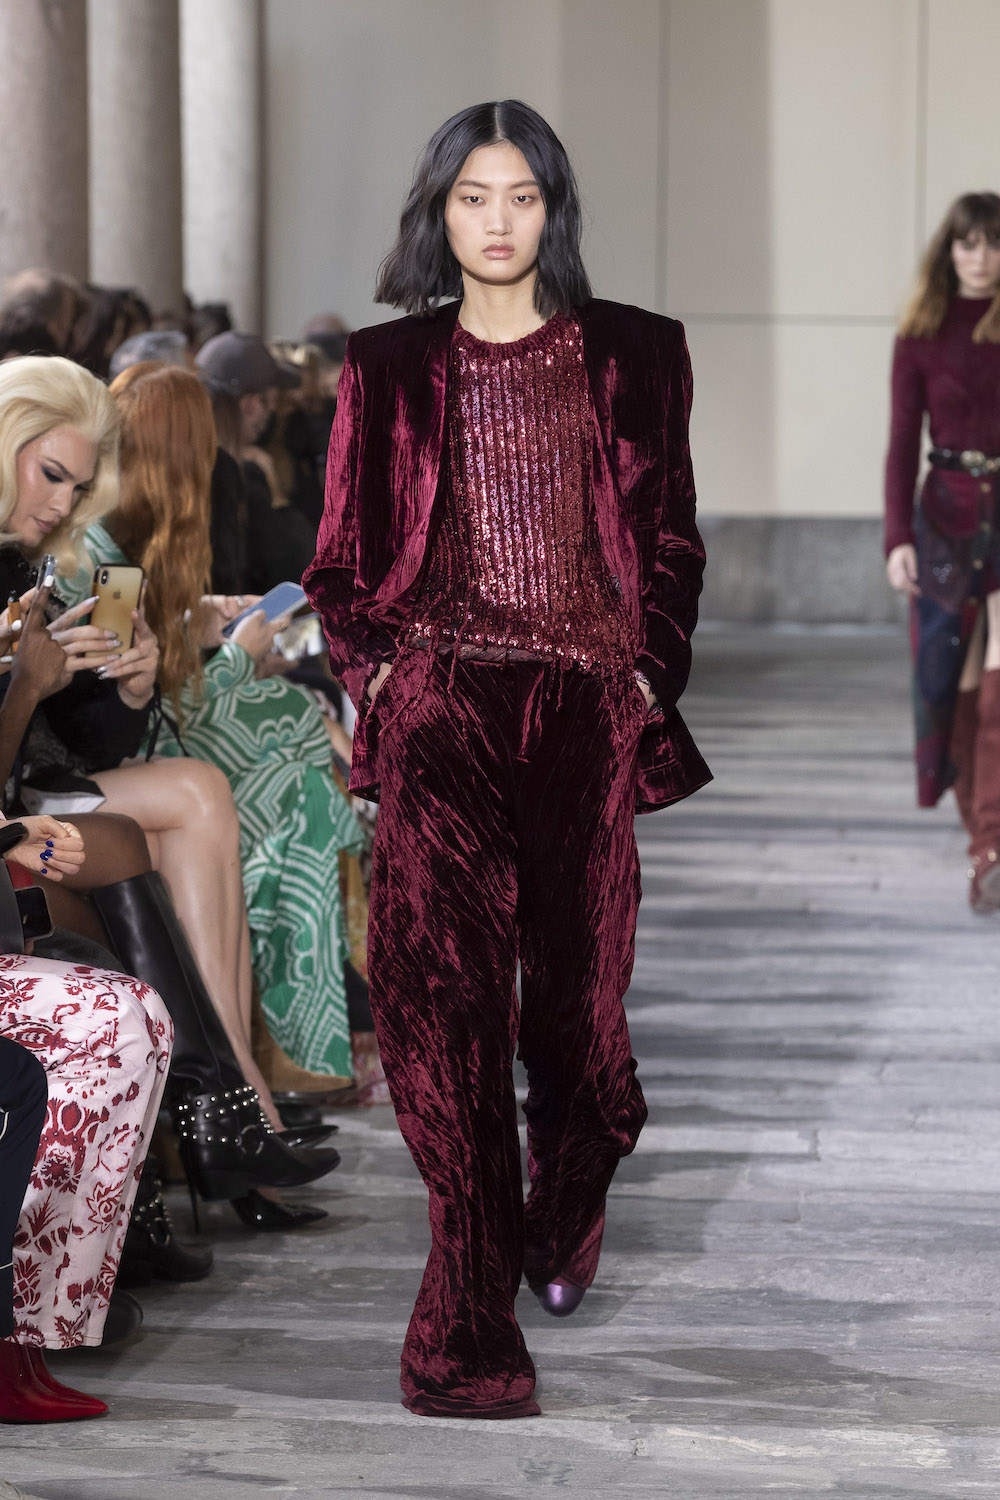  Another look from Etro's Autumn/Winter 2022 show.